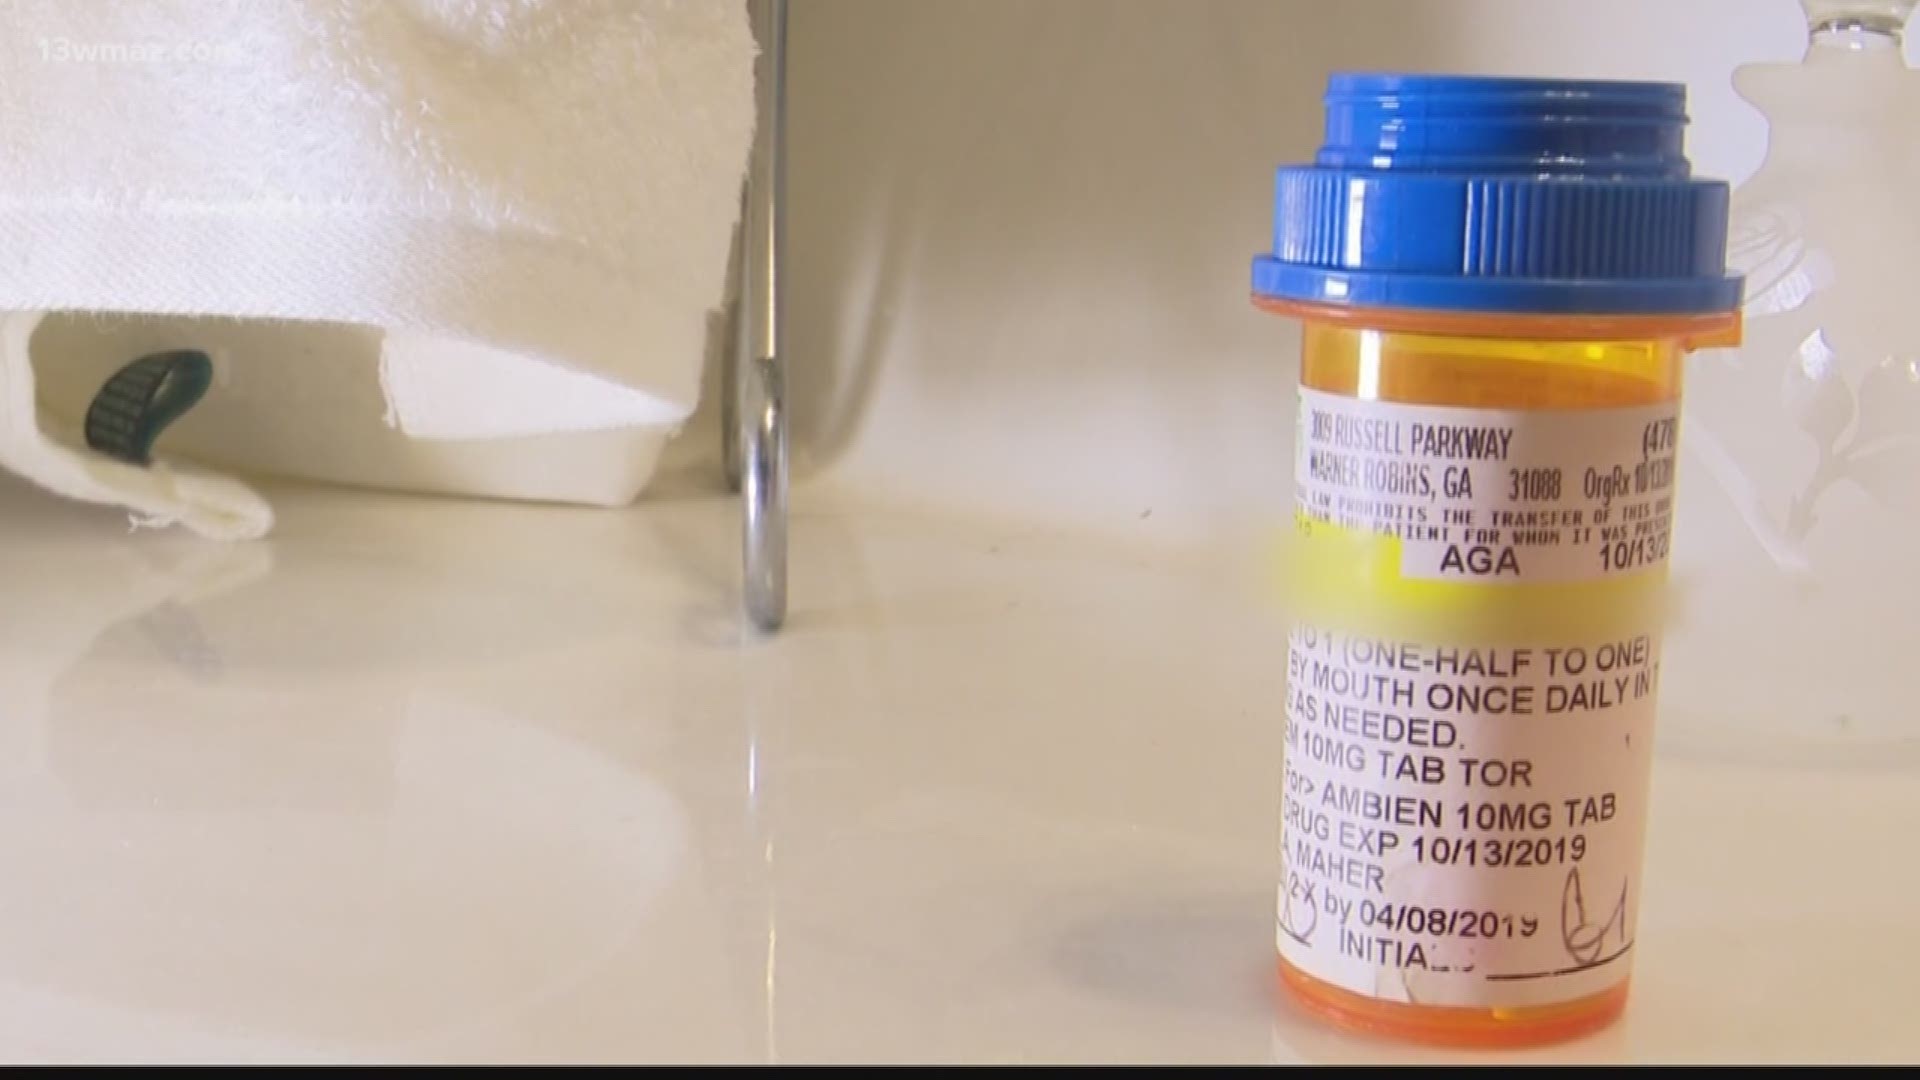 You hear about sleep aids all the time. You probably have seen dozens of commercials for Ambien, Lunesta, and more than a dozen similar drugs, but what do you know about the risks that come with them? One woman found out the hard way.